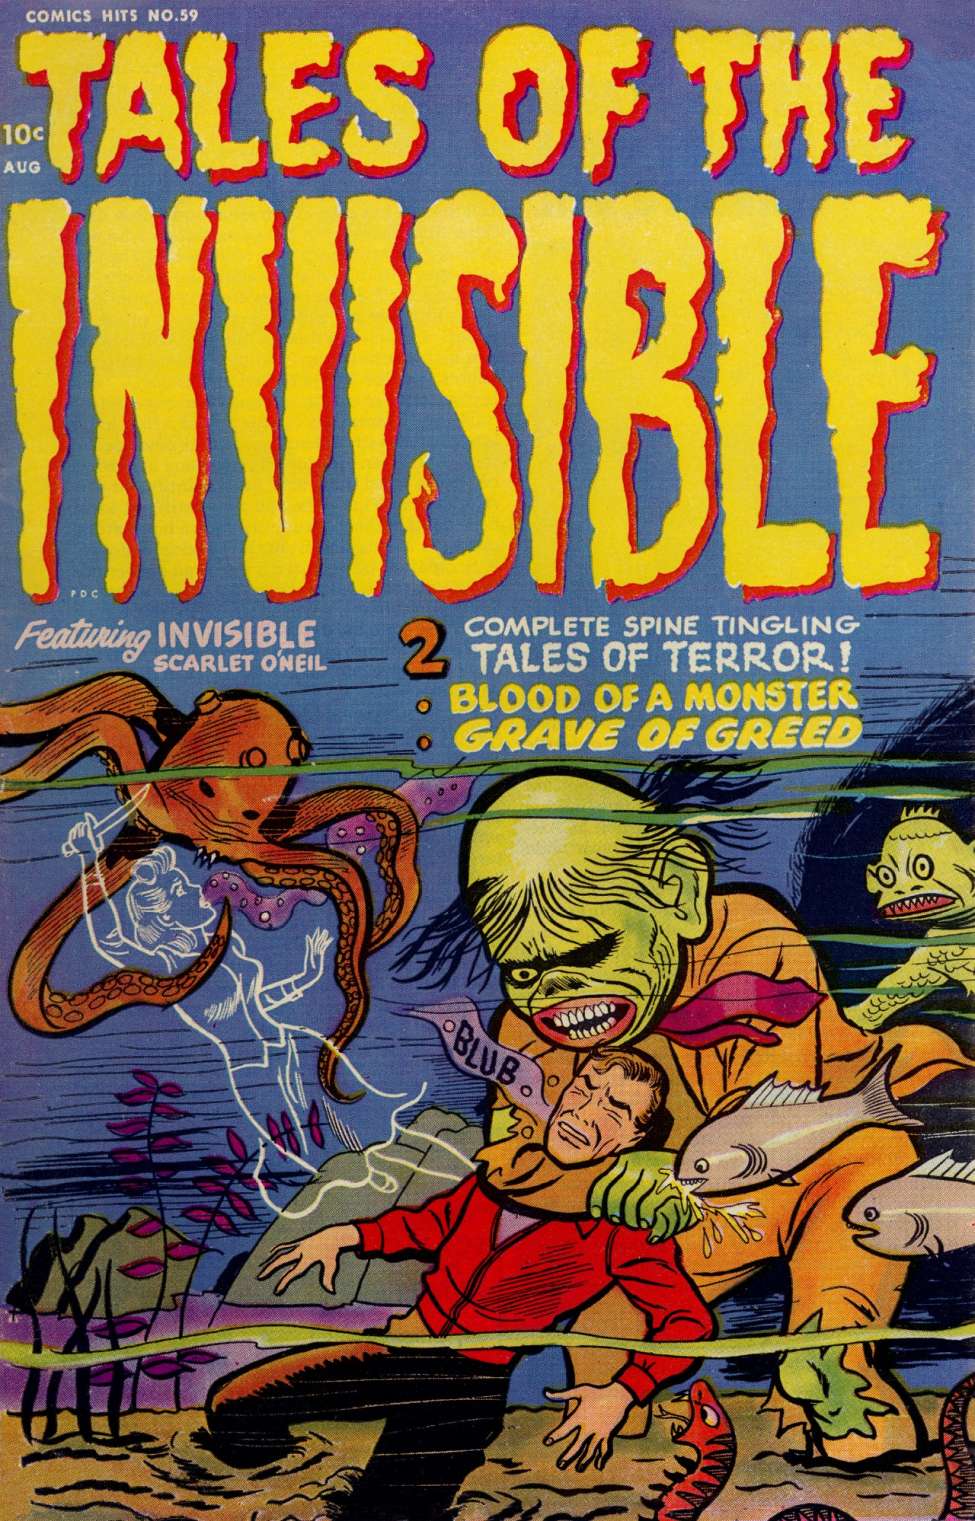 Book Cover For Harvey Comics Hits 59 - Tales Of The Invisible